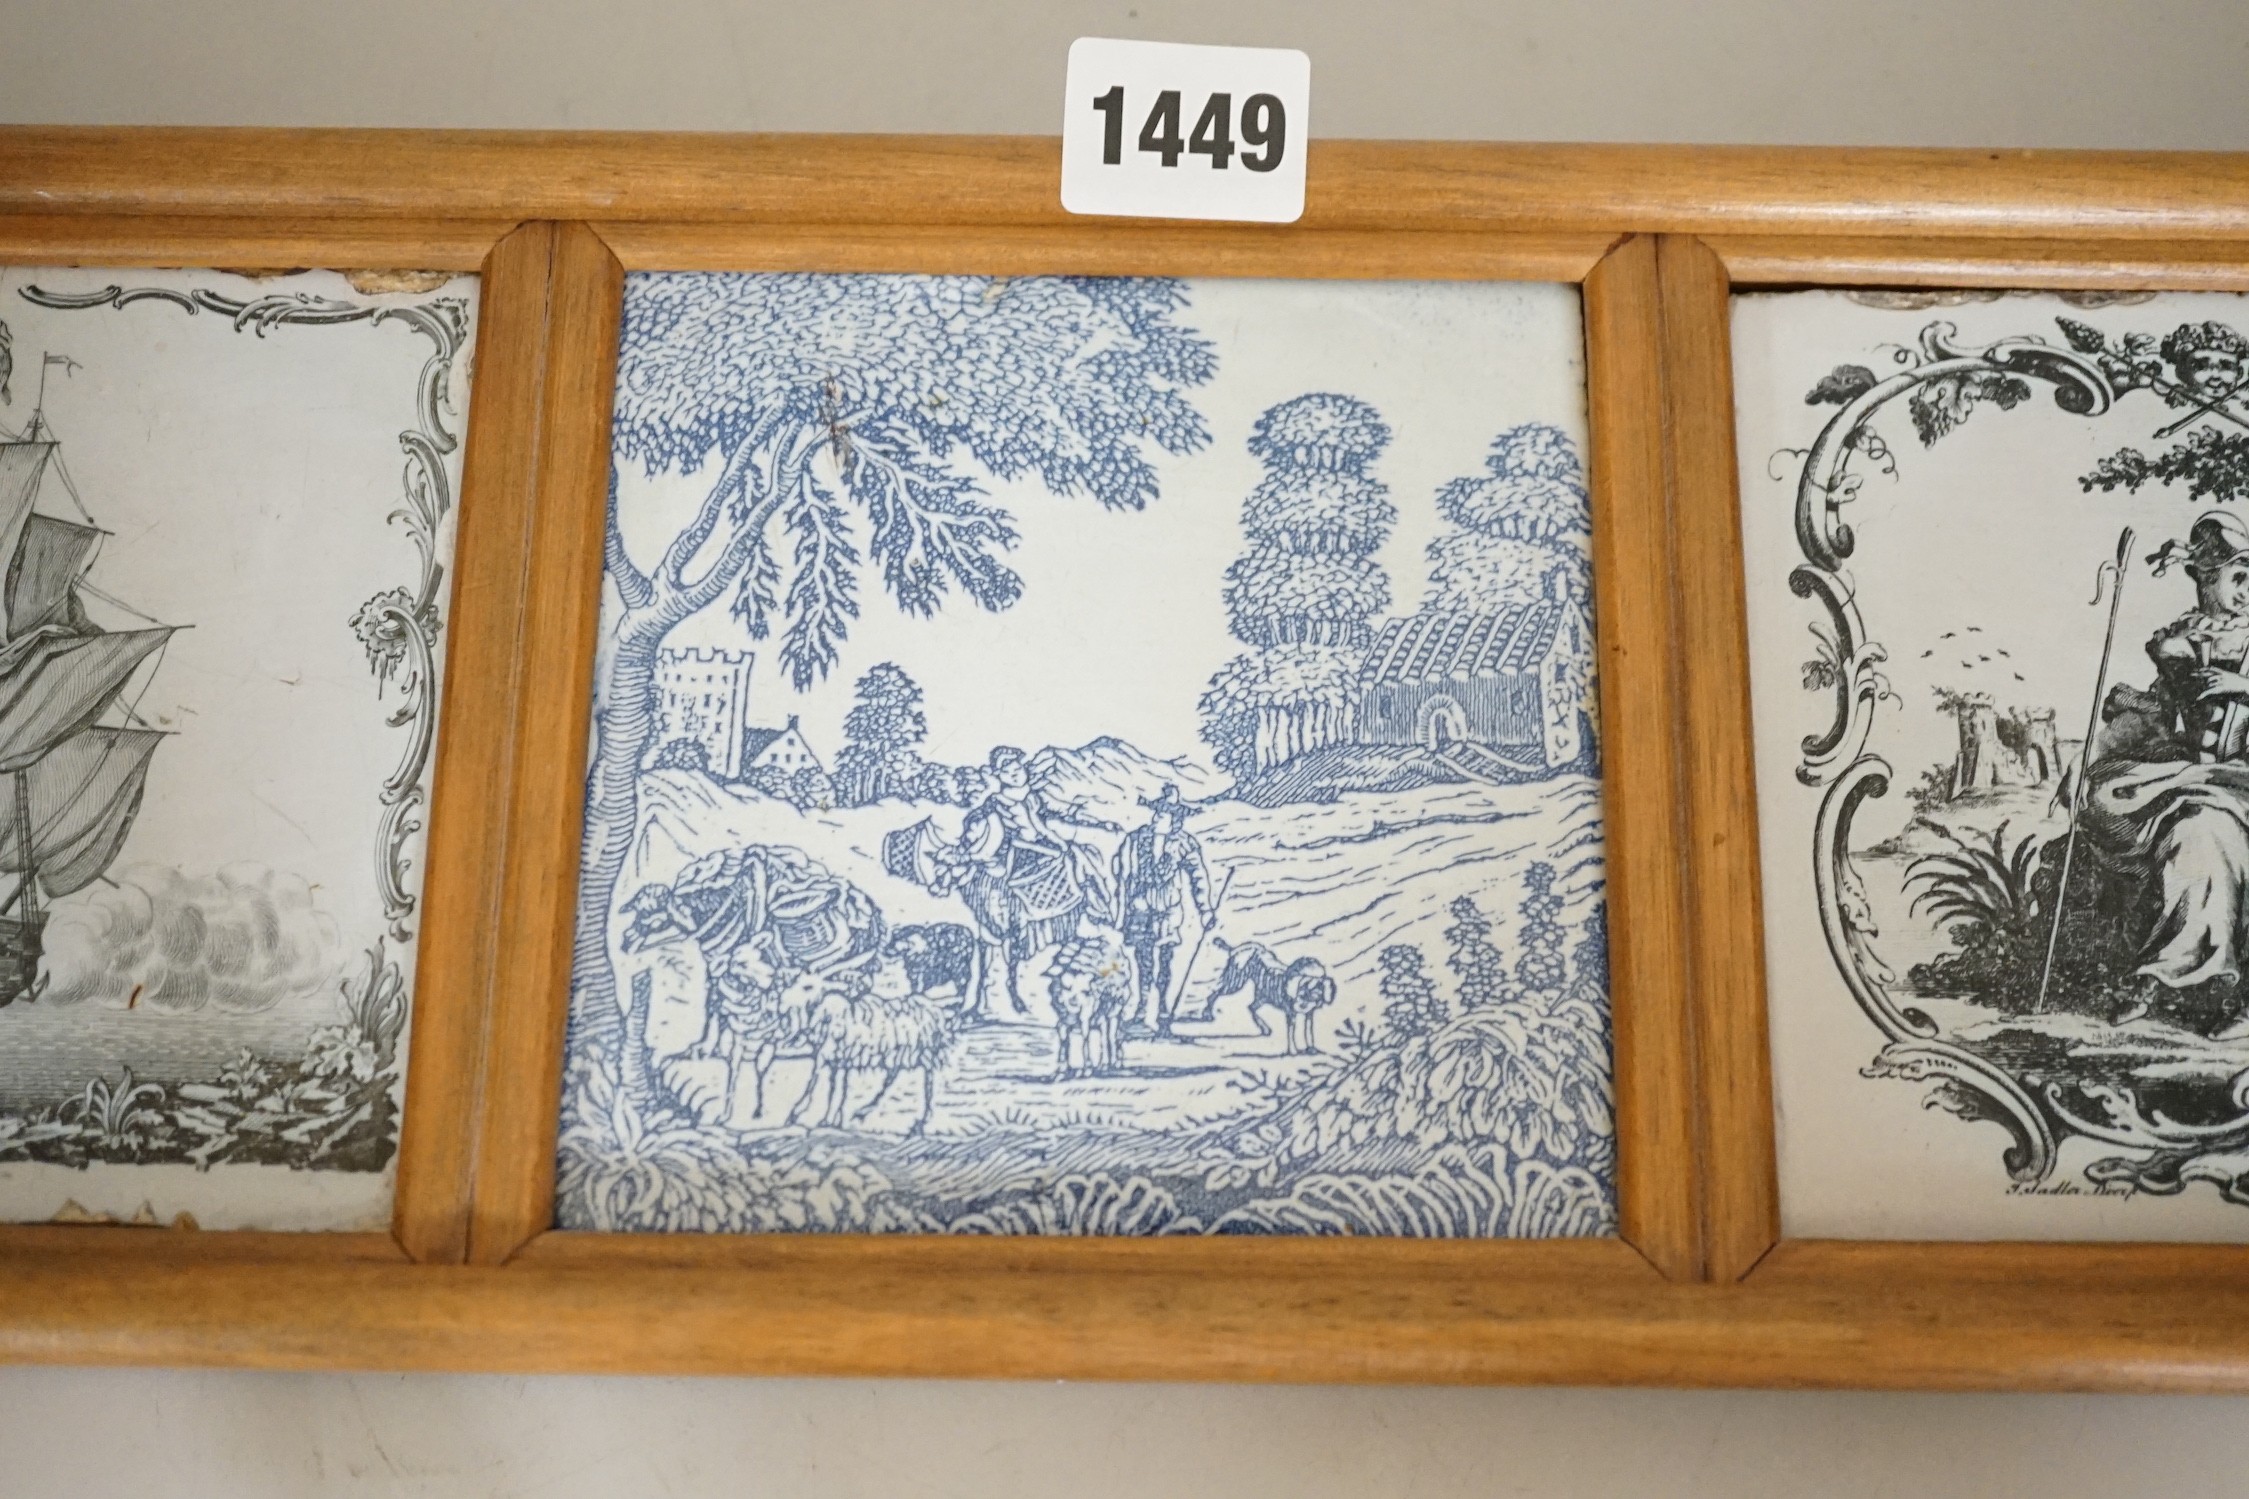 Two John Sadler Liverpool delftware black transfer printed tiles, c.1770 and a blue printed tile, in the same wooden mount. Overall 16 x 45cm